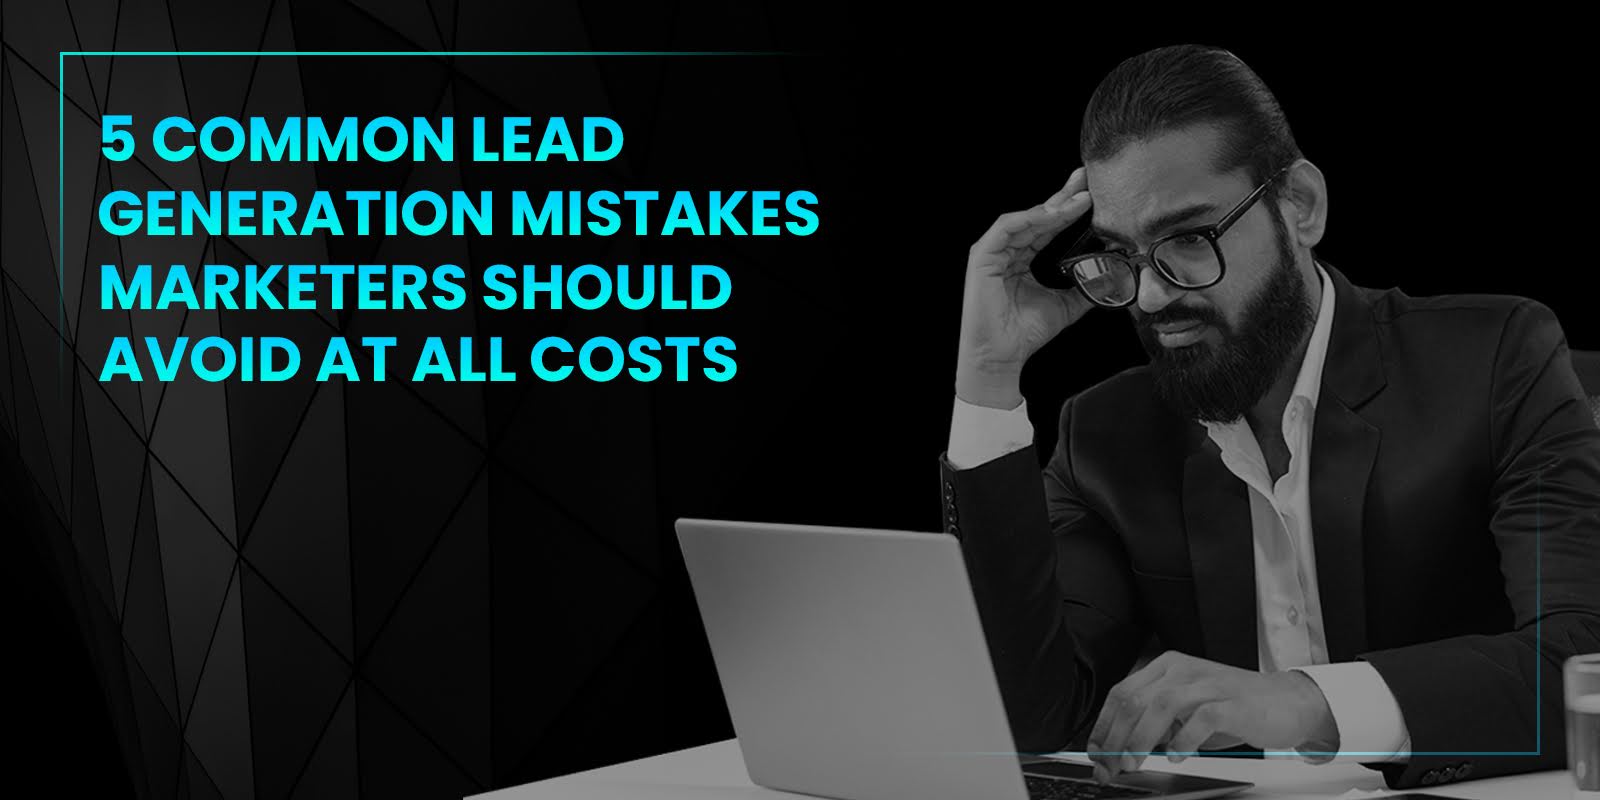 5 Common Lead Generation Mistakes Marketers Should Avoid at All Costs